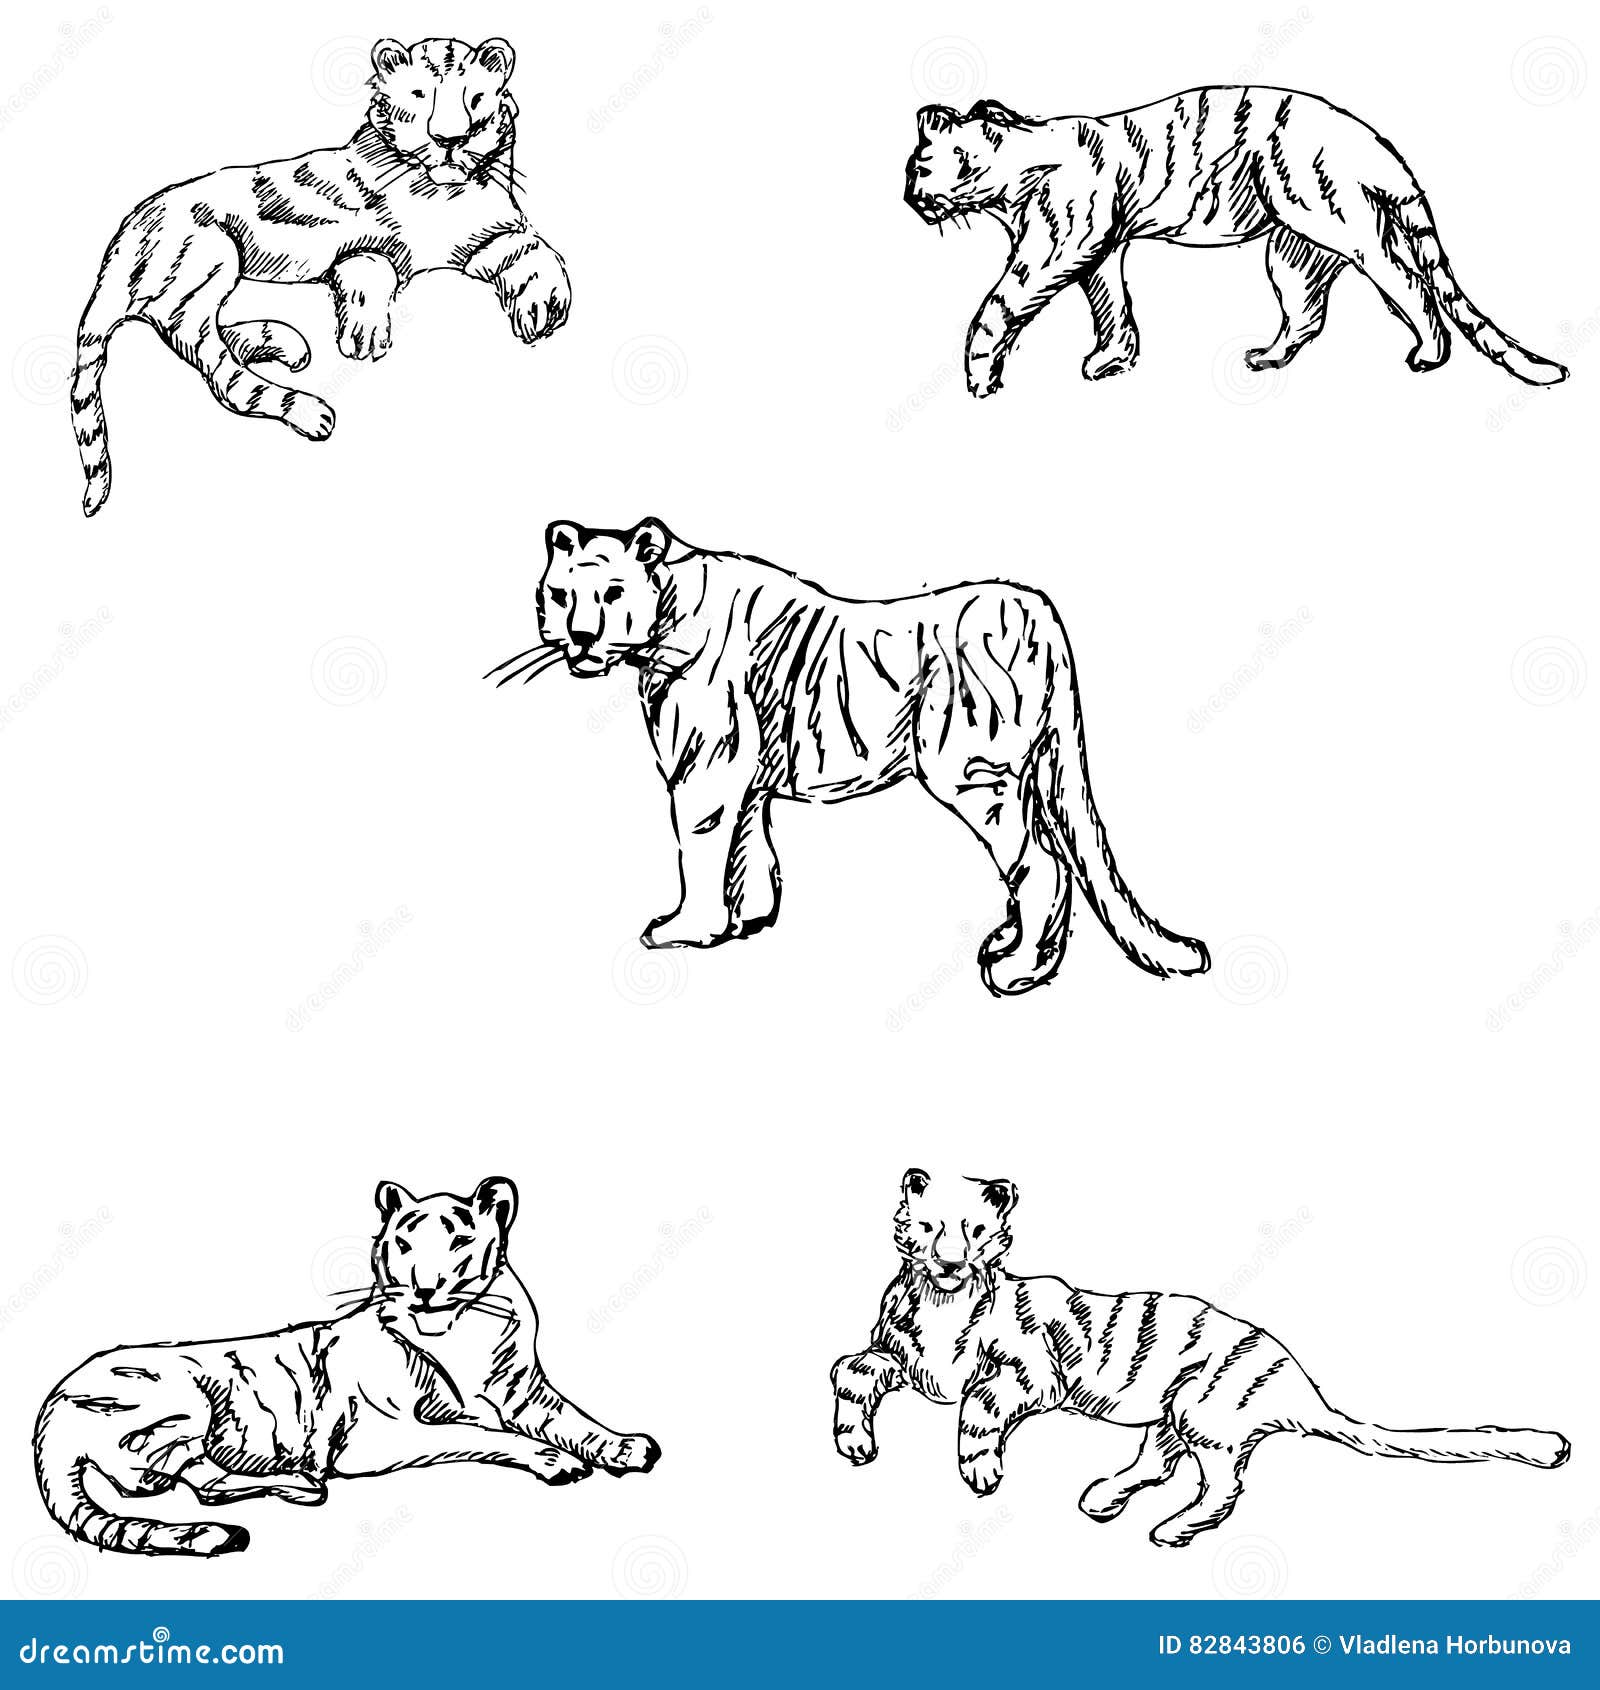 Tigers. a sketch by hand stock vector. Illustration of carnivore - 82843806